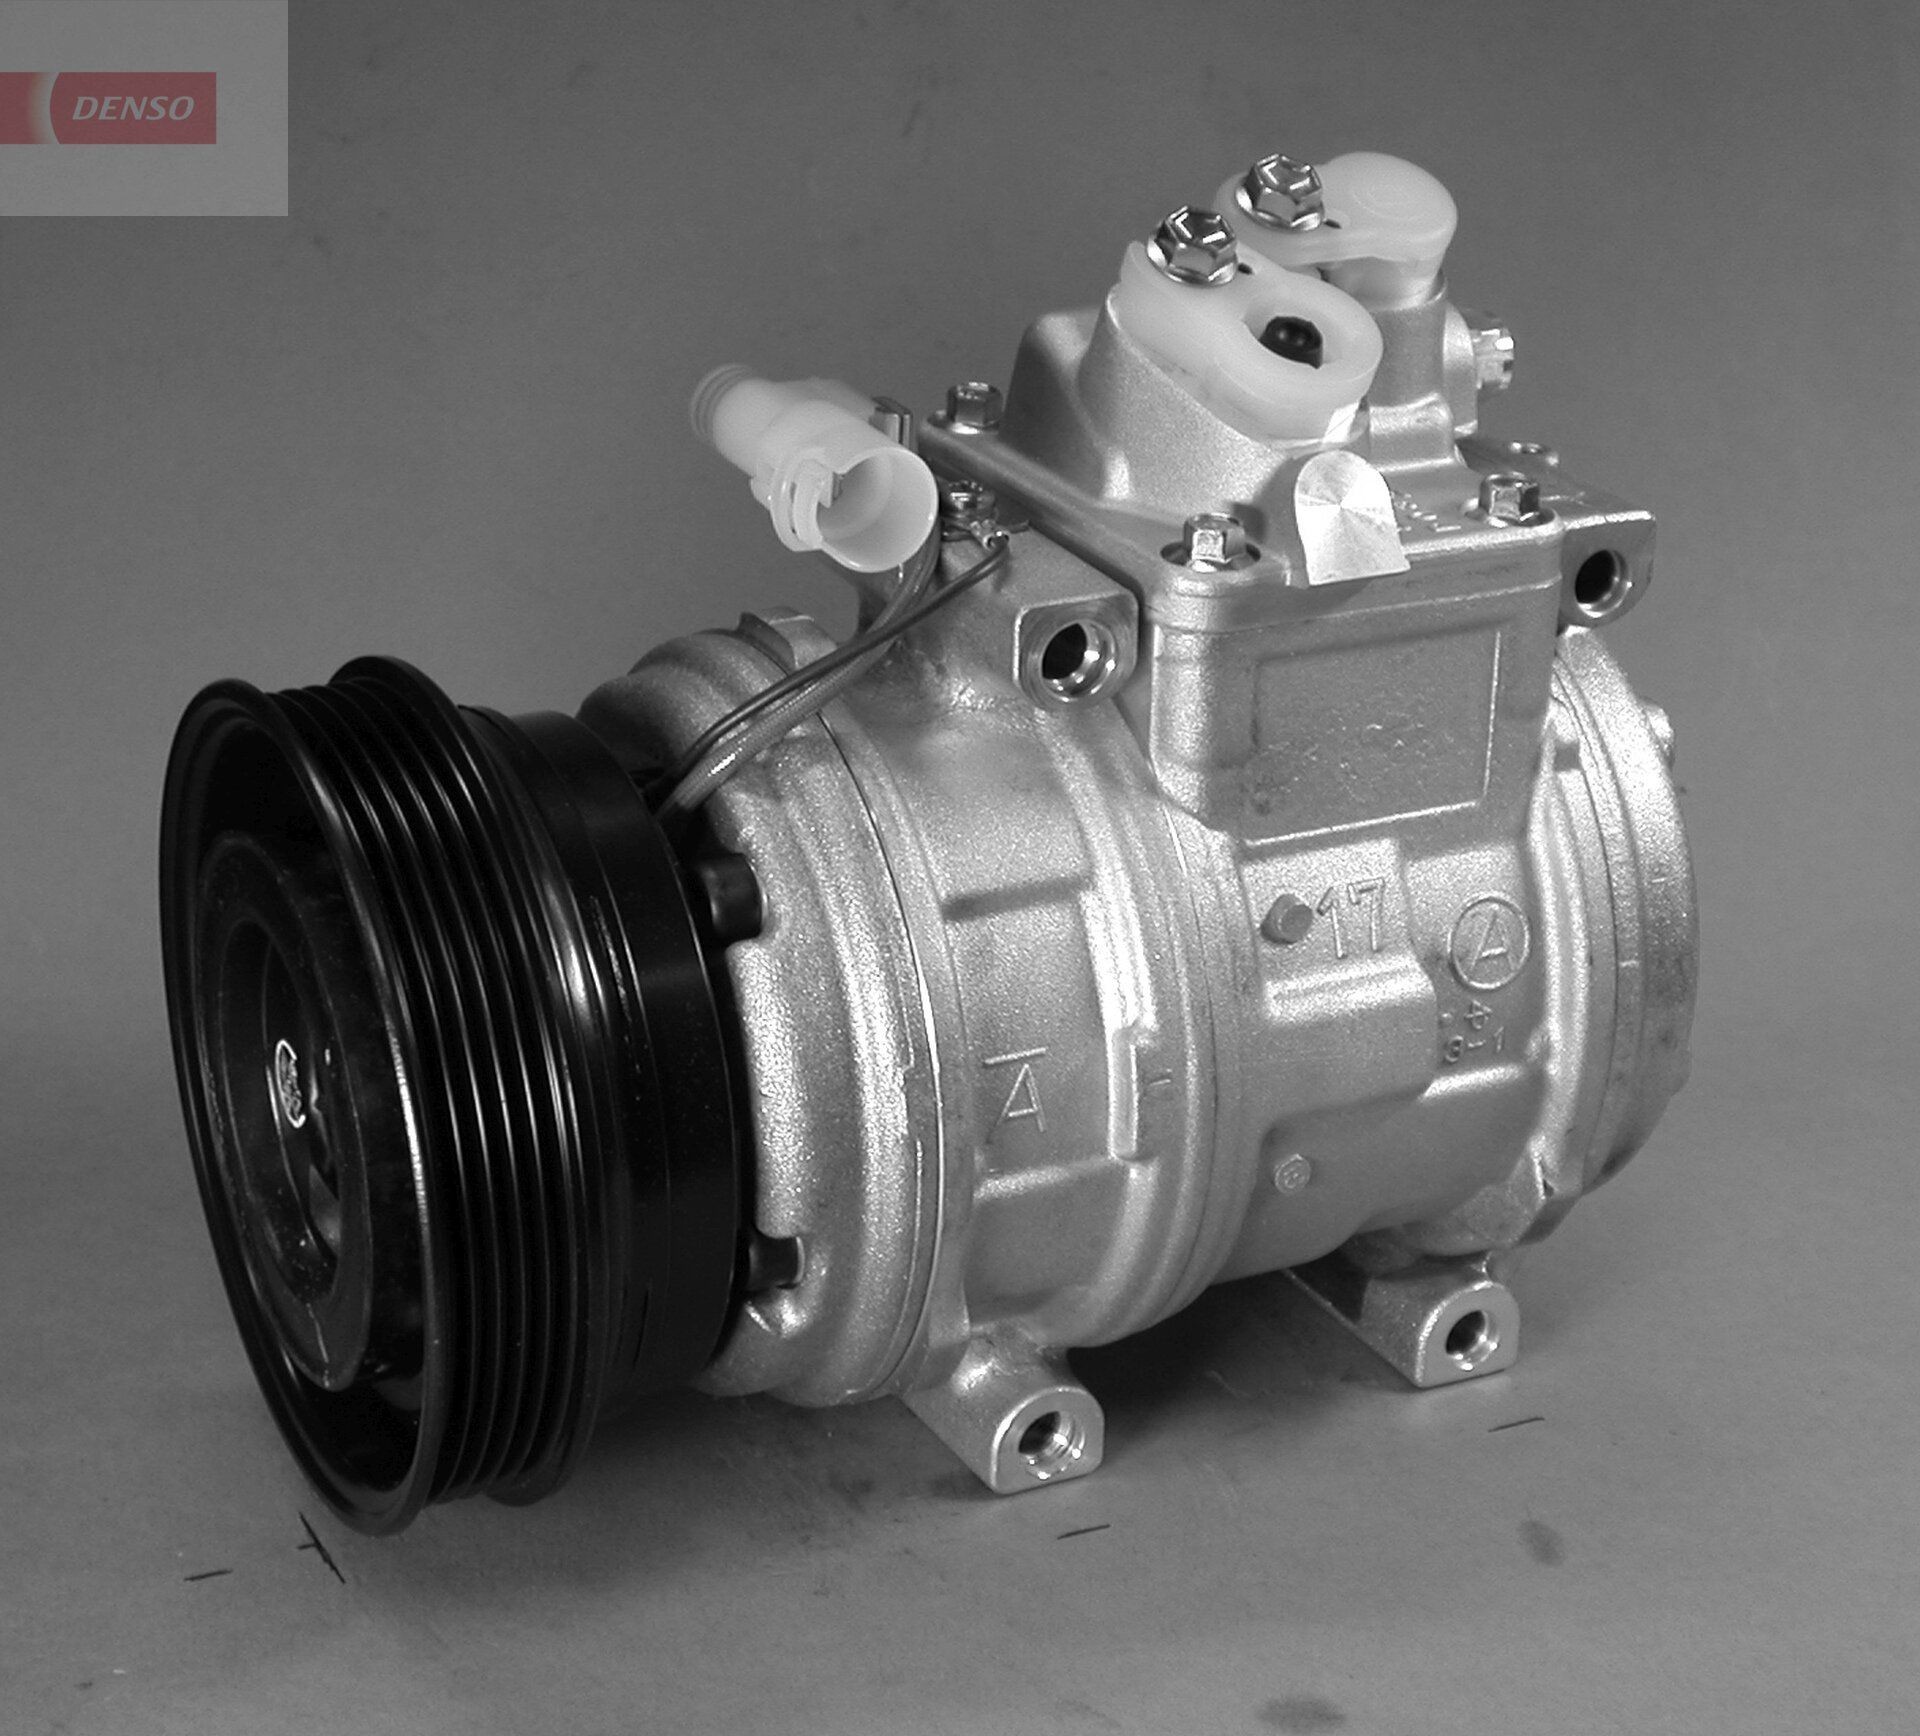 DENSO DCP14004 Air conditioning compressor 10PA17C, 12V, PAG 46, R 134a, with magnetic clutch